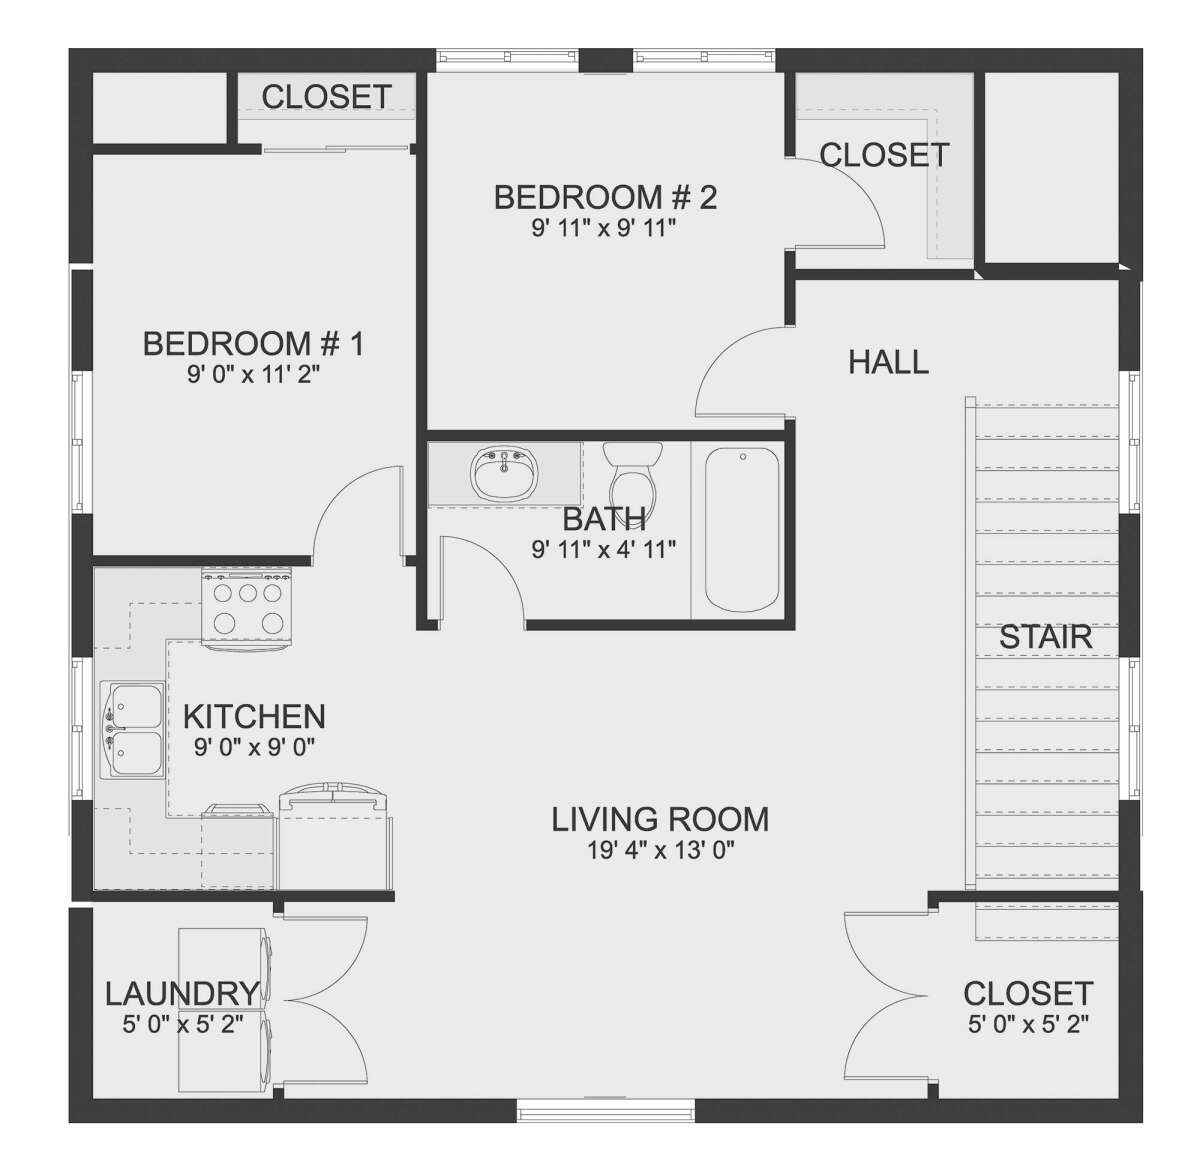 Traditional Plan: 900 Square Feet, 2 Bedrooms, 1.5 Bathrooms - 2802-00124